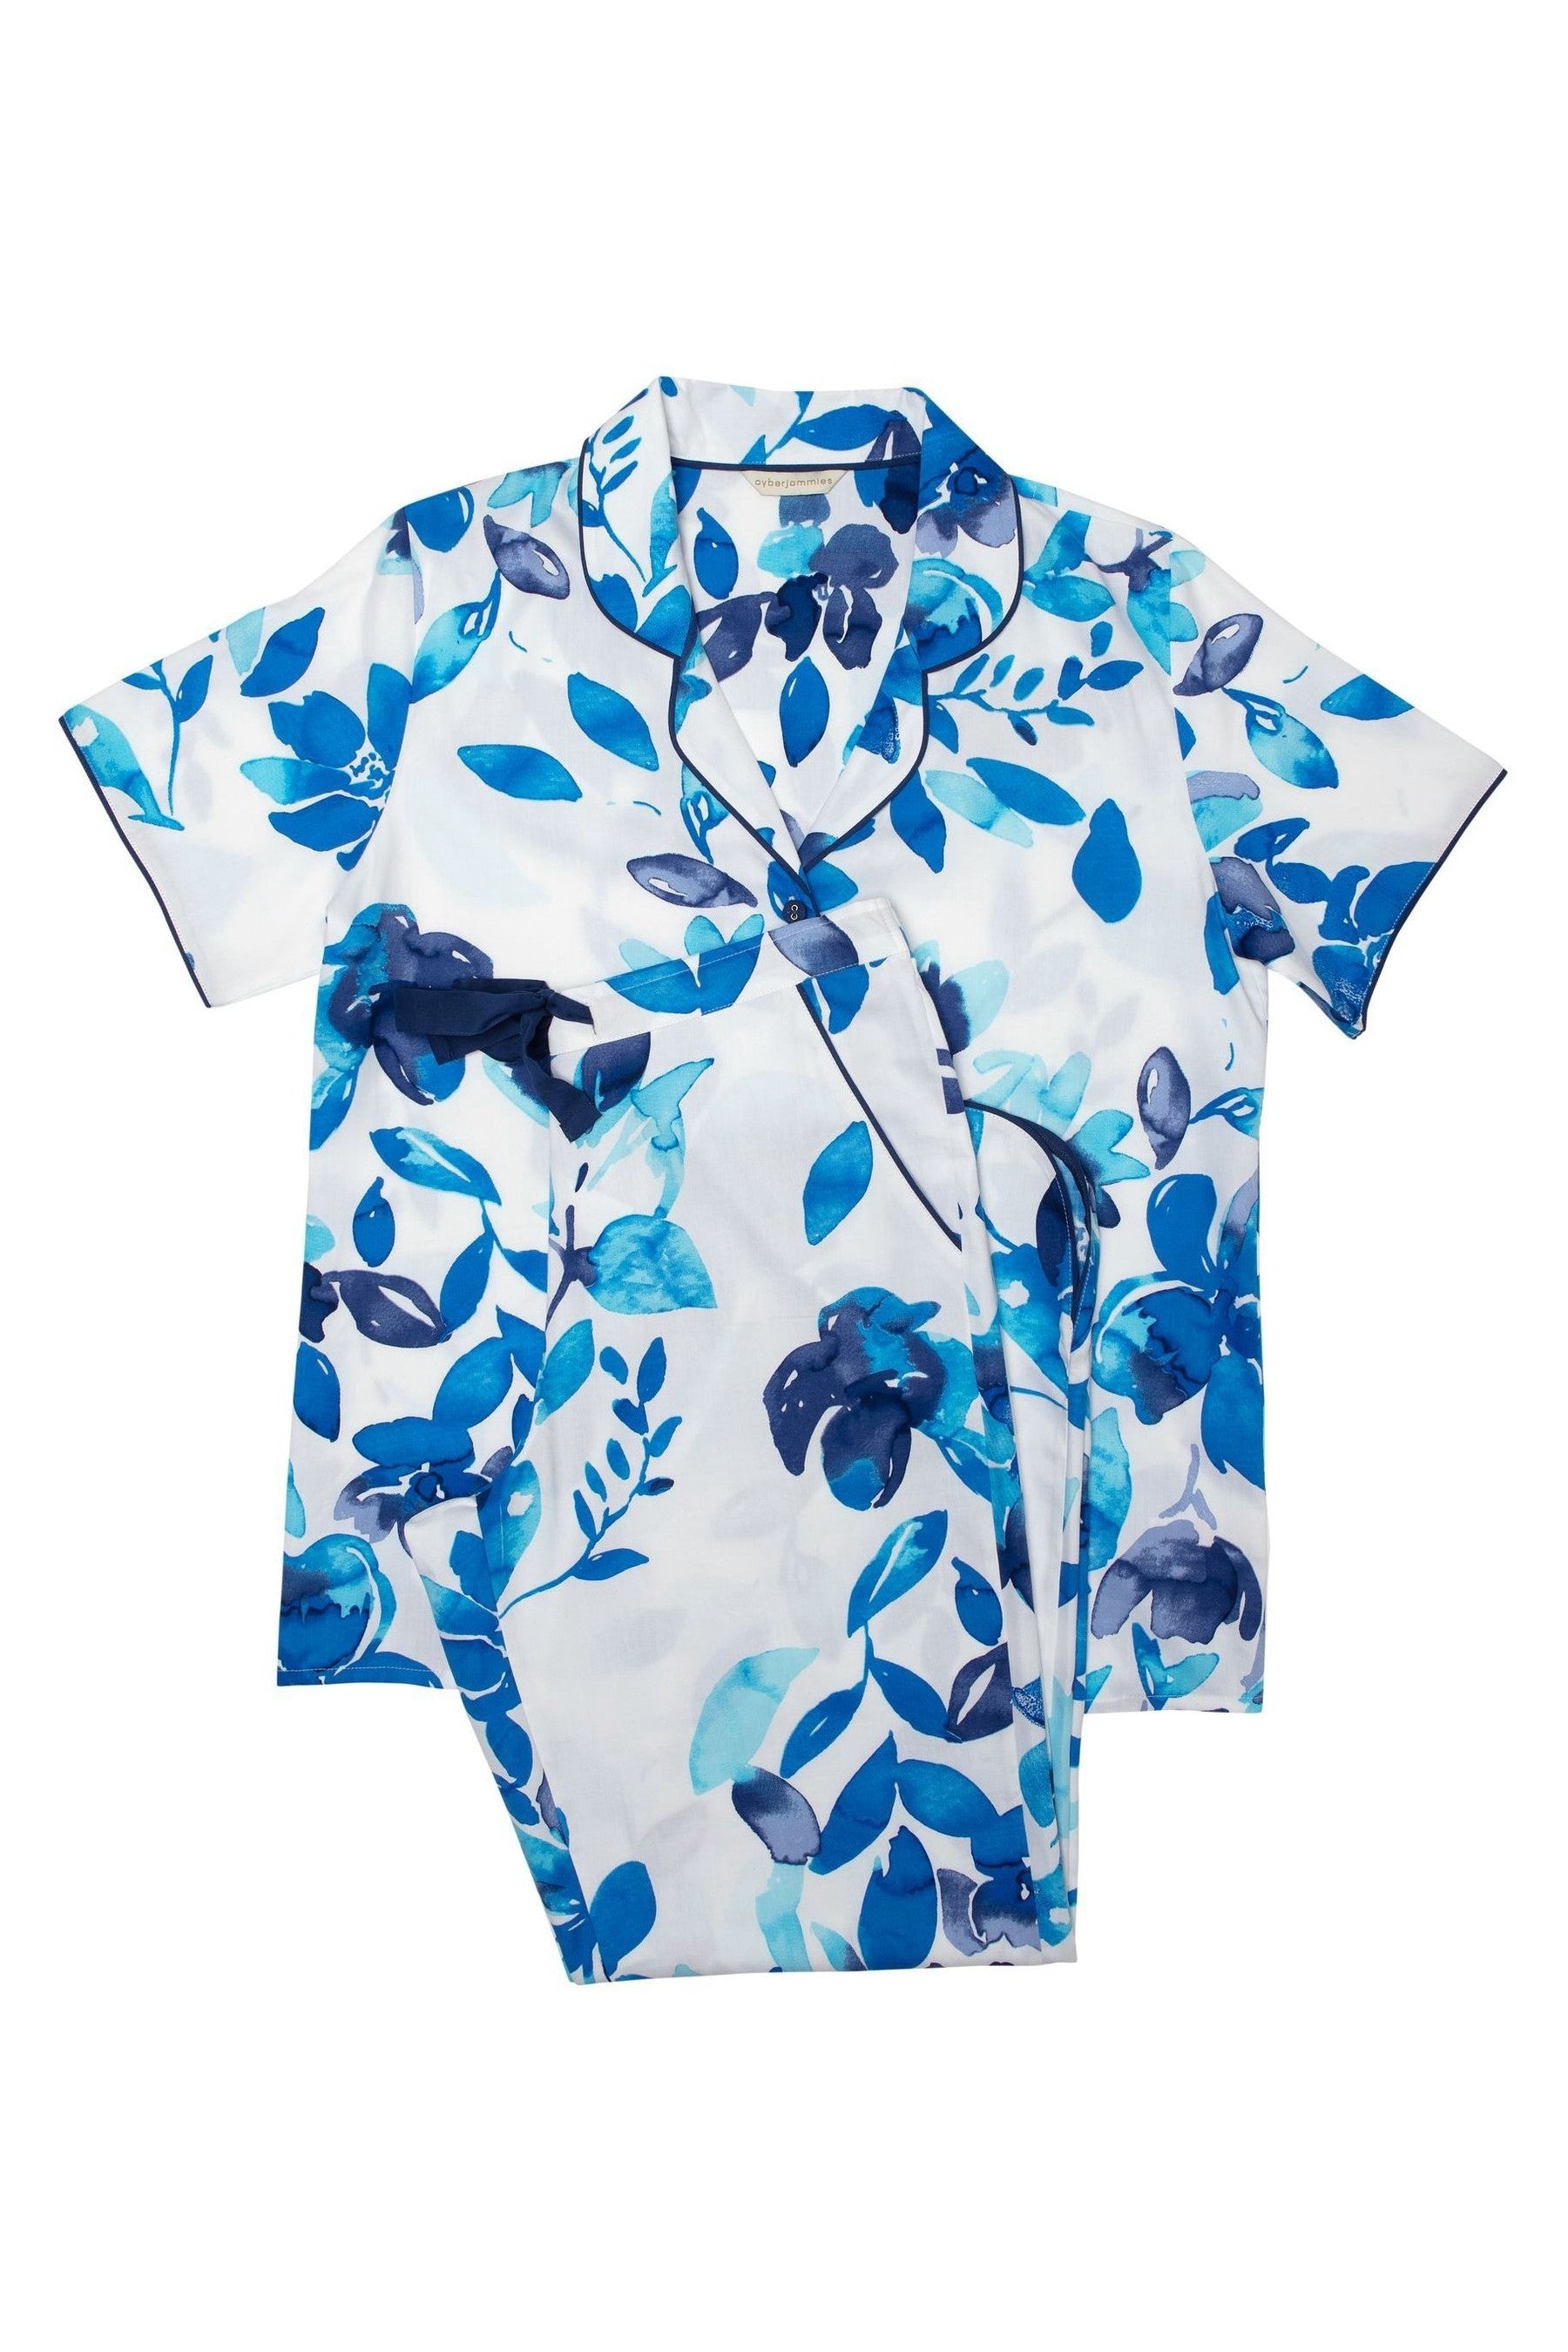 Blue Color Digital Abstract Printed loungewear/Nightsuit For Women With Pants.